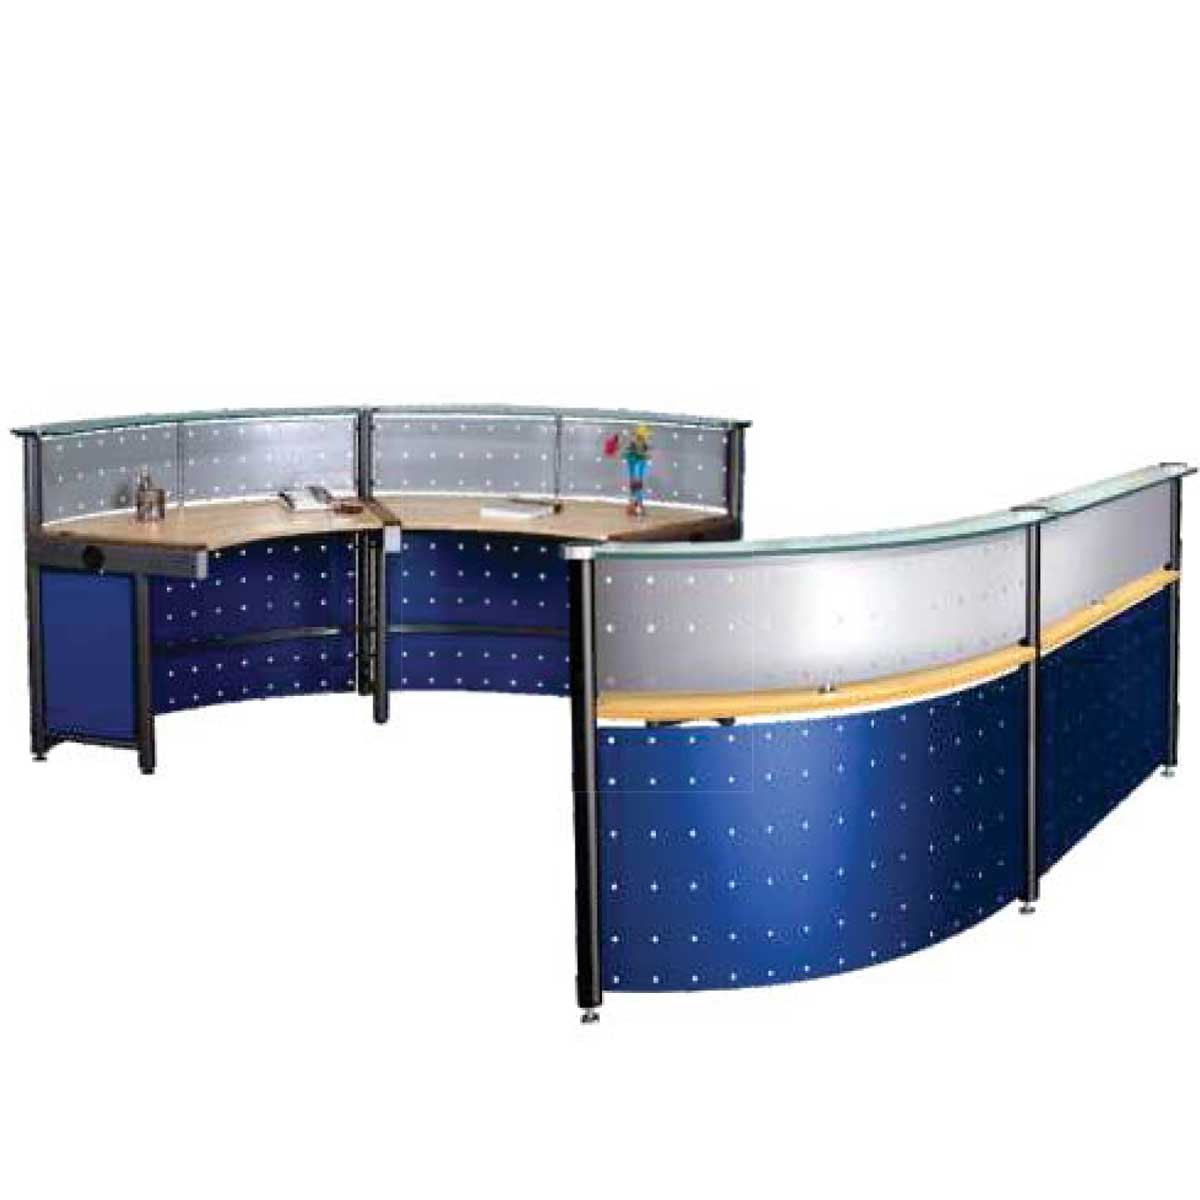 Reception Table Manufacturers, Suppliers in Faridabad Sector 21a